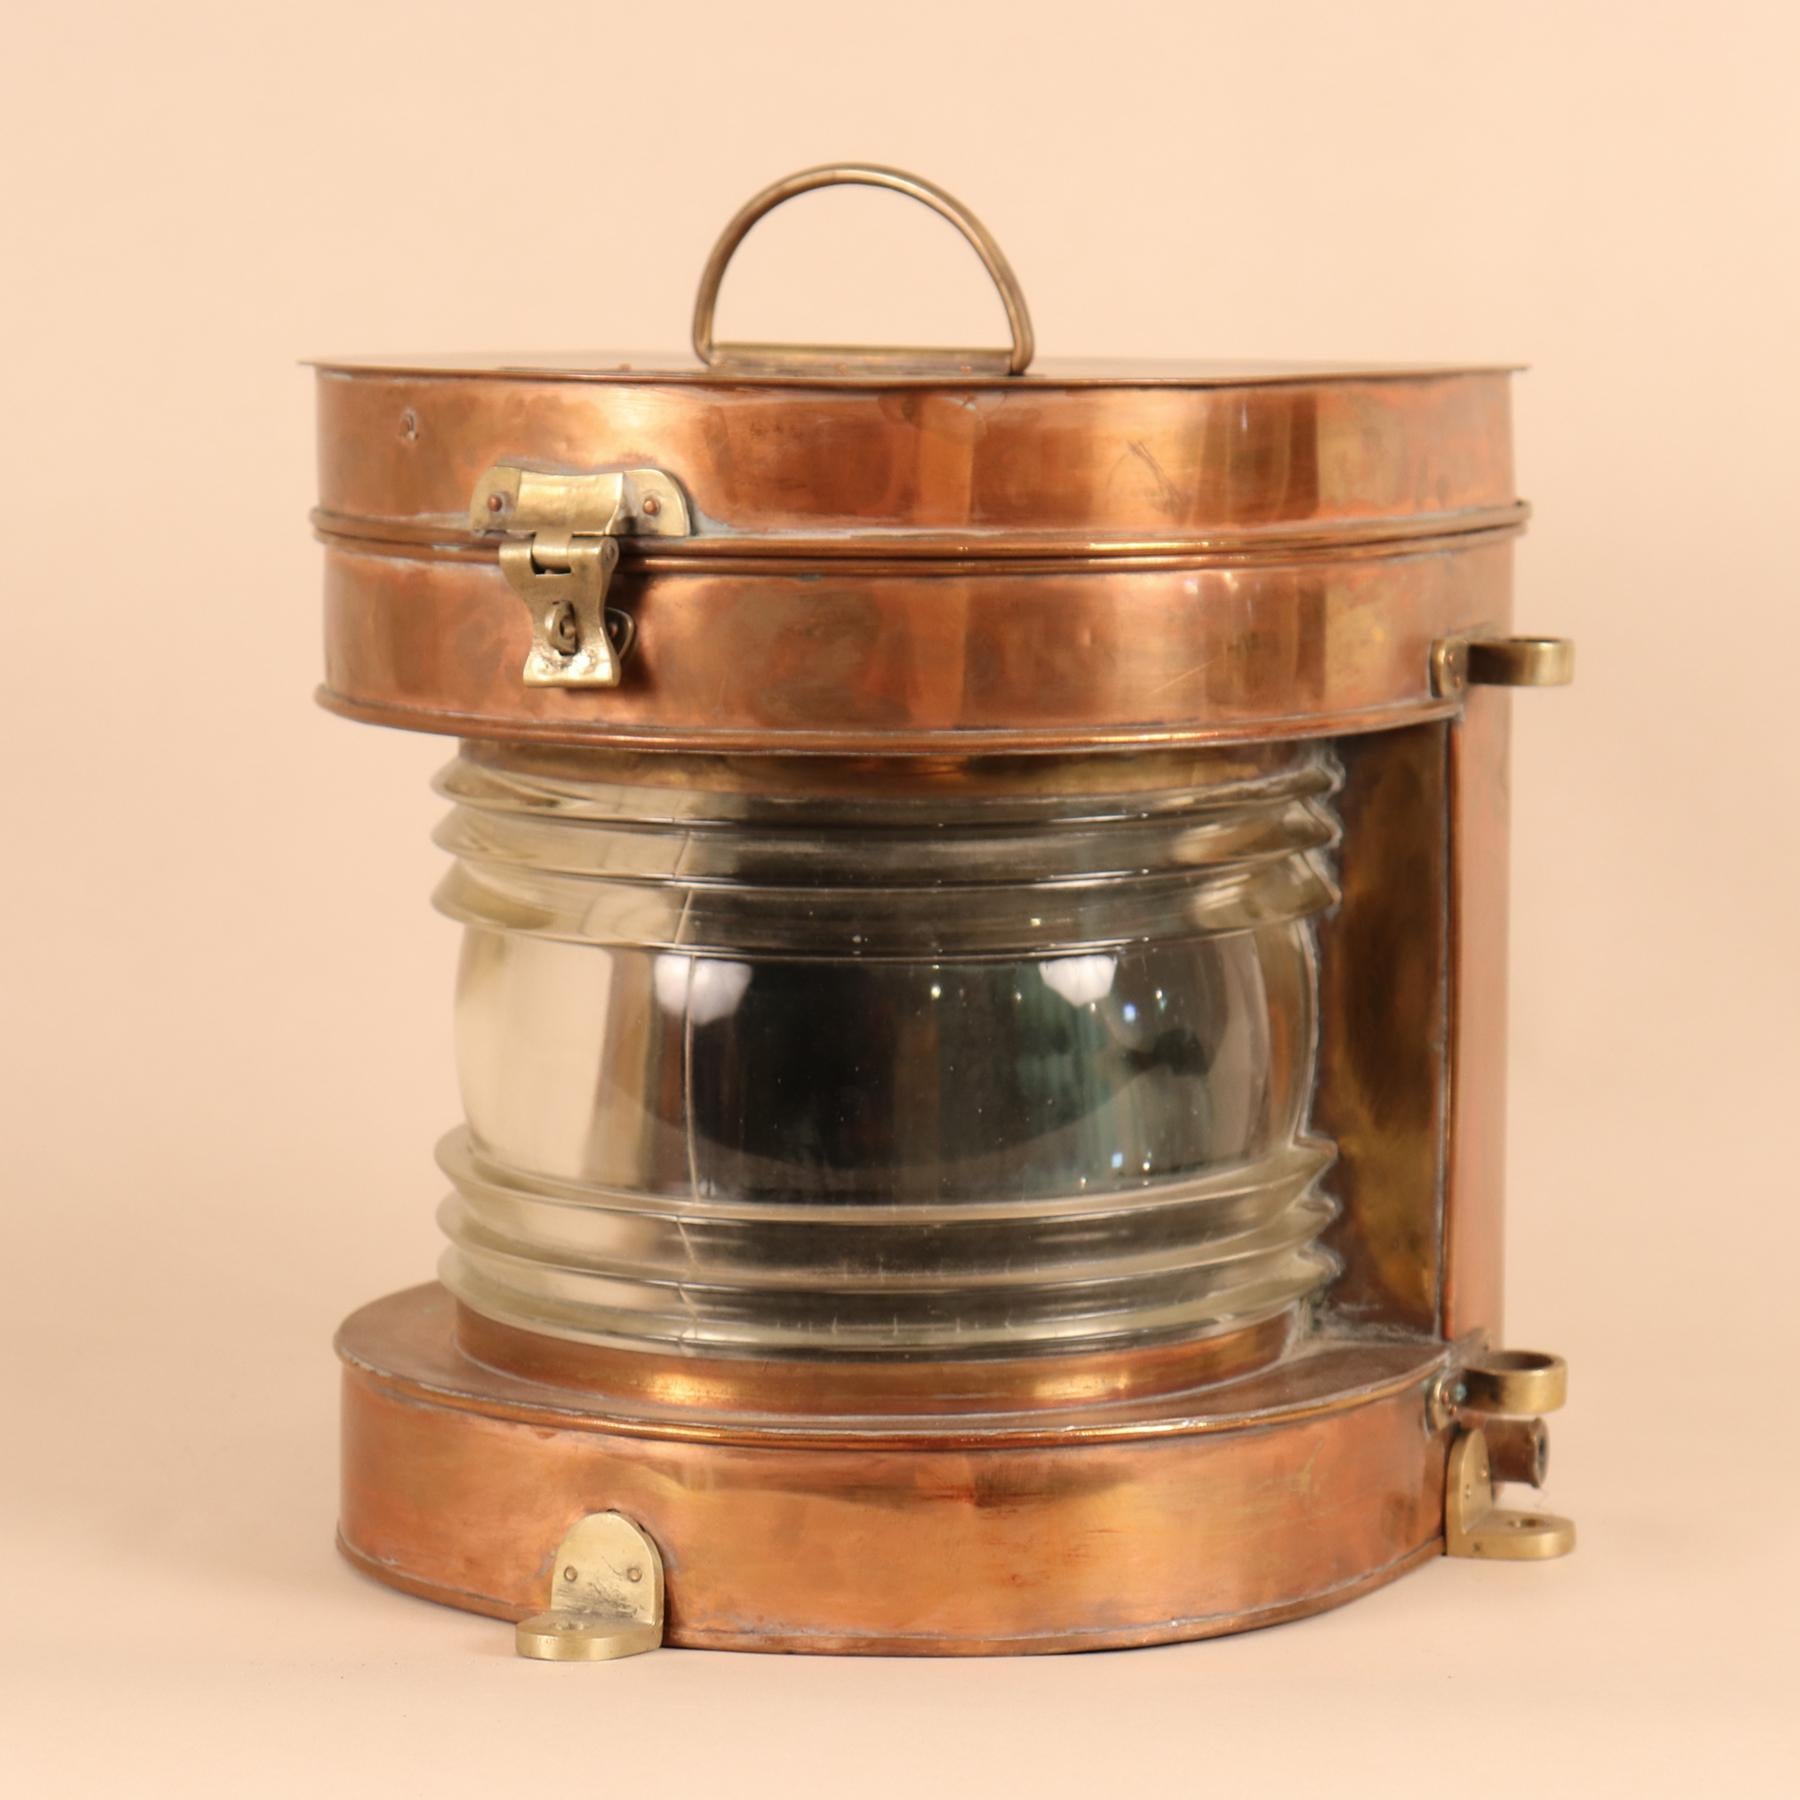 An authentic, vintage copper nautical lantern with brass accents and thick glass Fresnel lens. This circa 1950 marine light, manufactured by Tung Woo, Hong Kong, is hinged and hasped on top so that changing the bulb is easy. The lantern has all of